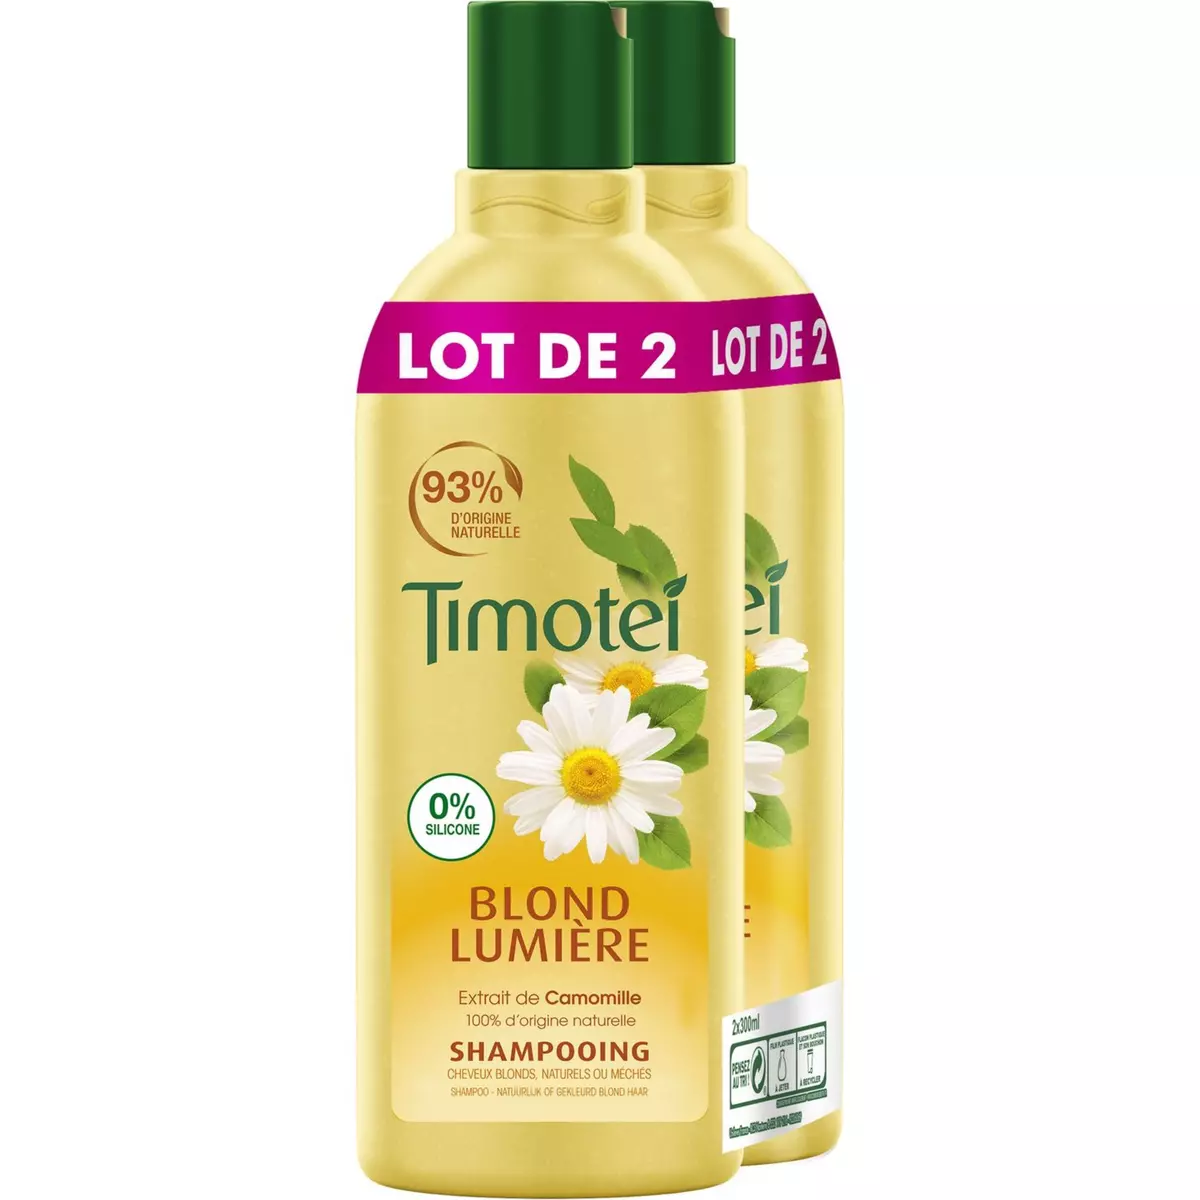 TIMOTEI Shampooing blond lumière camomille cheveux blonds 2x300ml